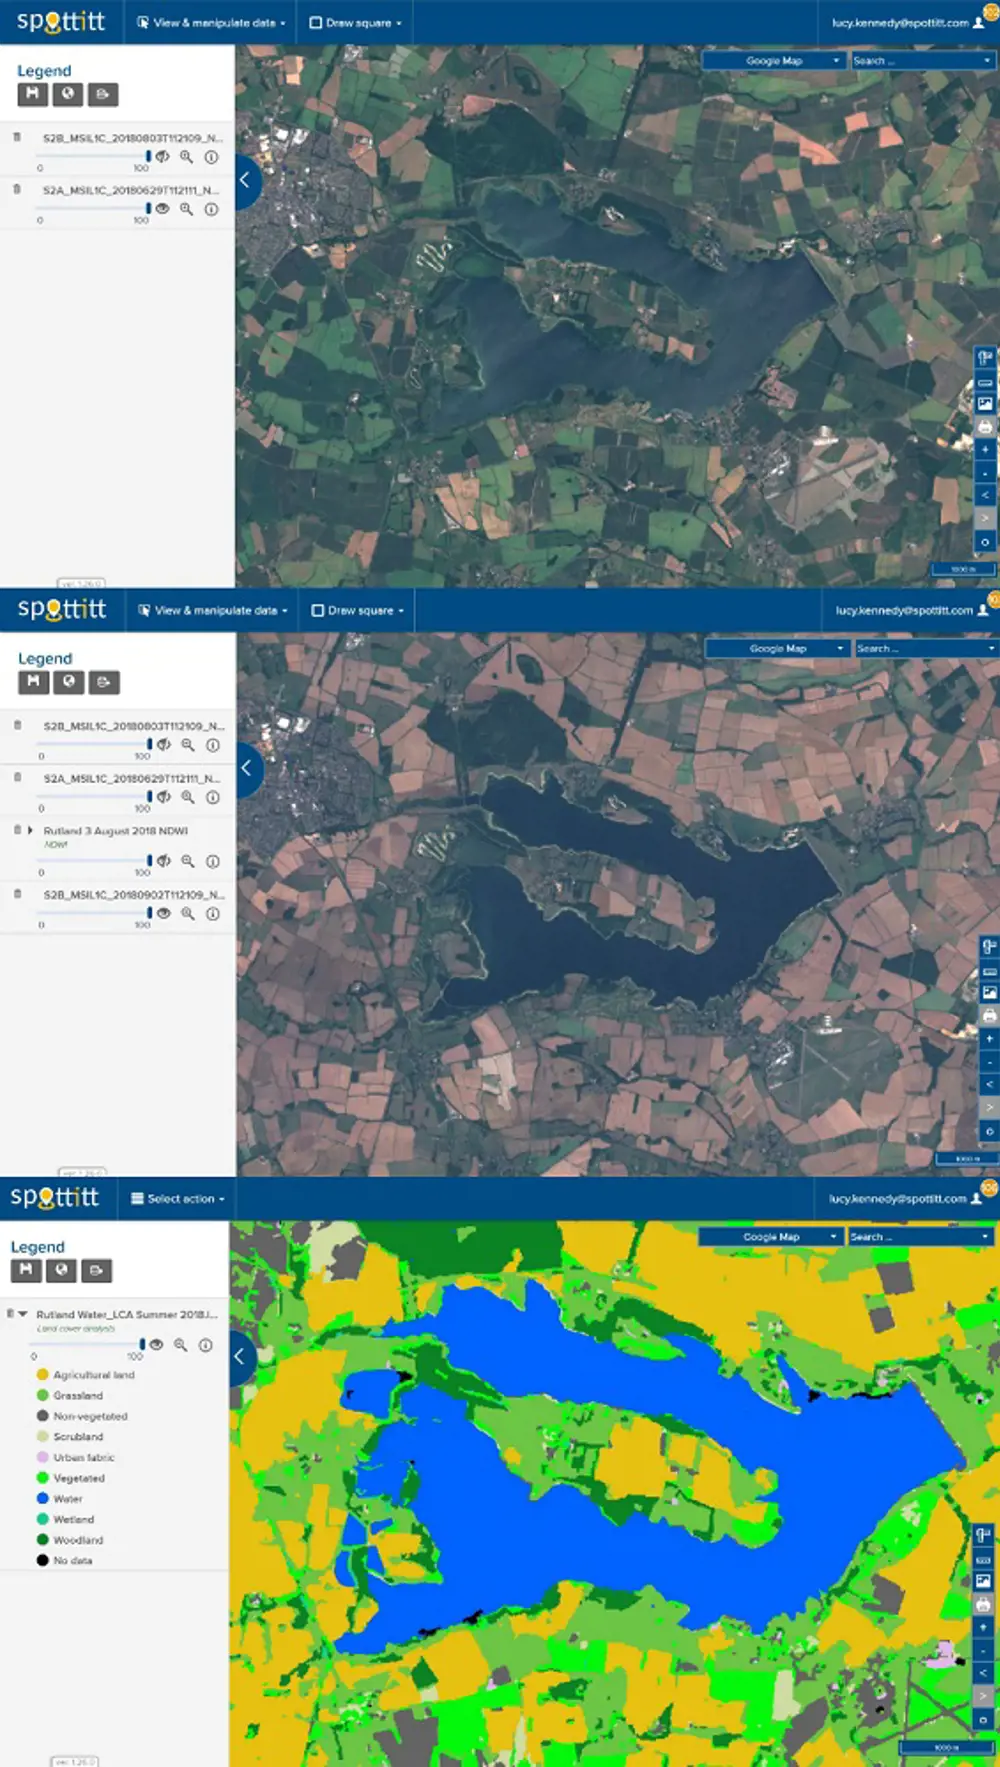 Copernicus Sentinel satellite images near Rutland Water in the United Kingdom. The top image has a larger proportion of green fields compared to the middle image which is of the same area and is more dry. The bottom image is coloured based on the type of land. 